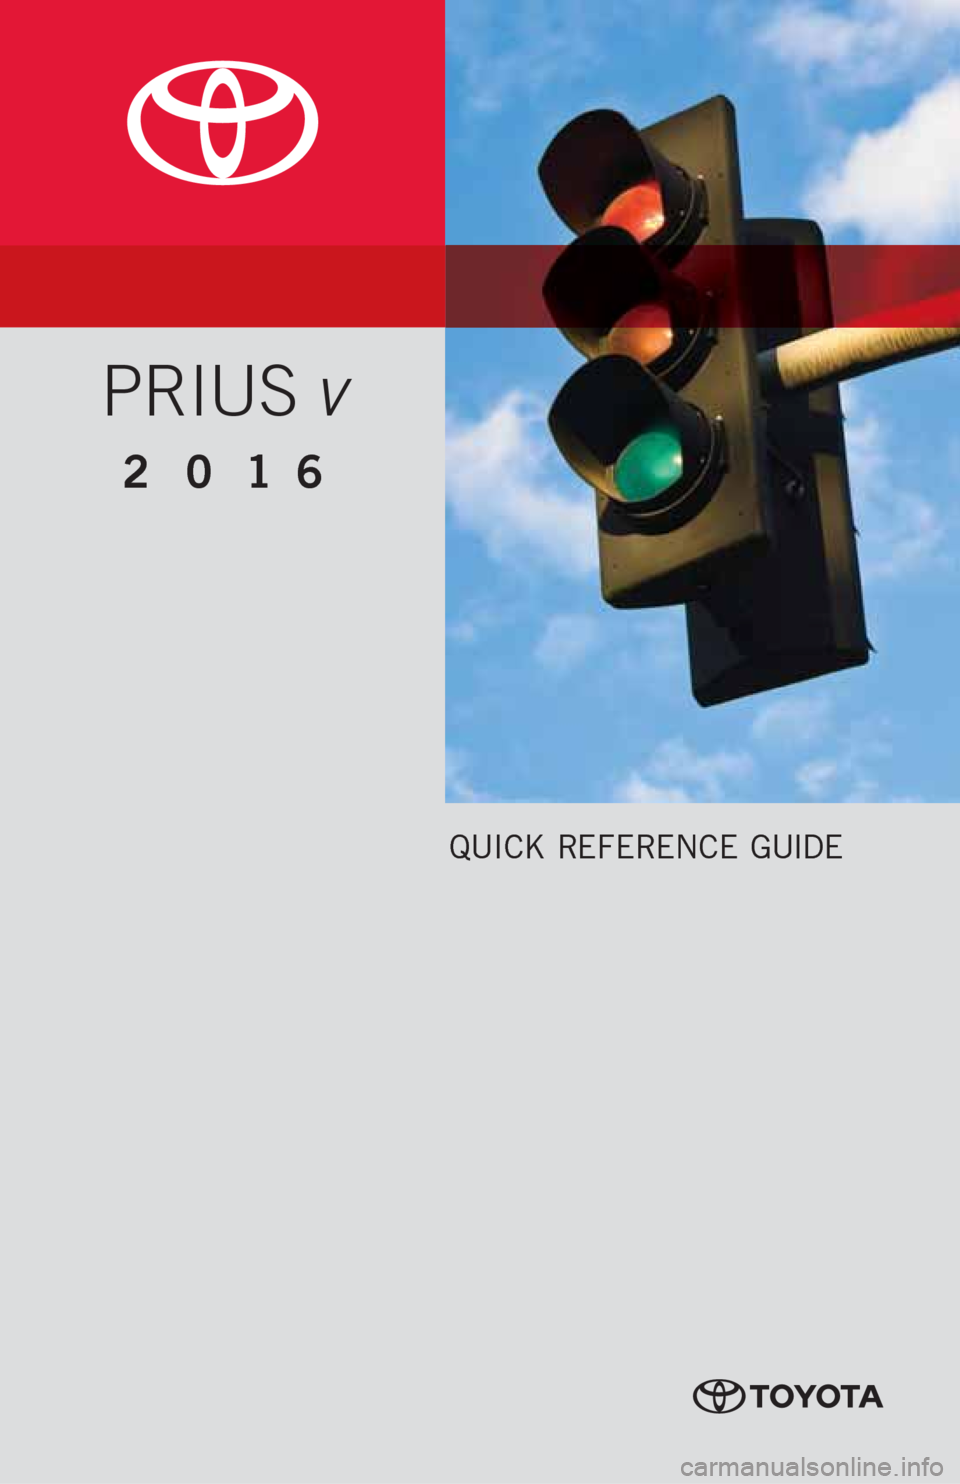 TOYOTA PRIUS V 2016 ZVW40 / 1.G Quick Reference Guide QUICK REFERENCE GUIDE
2016
PRIUS v 